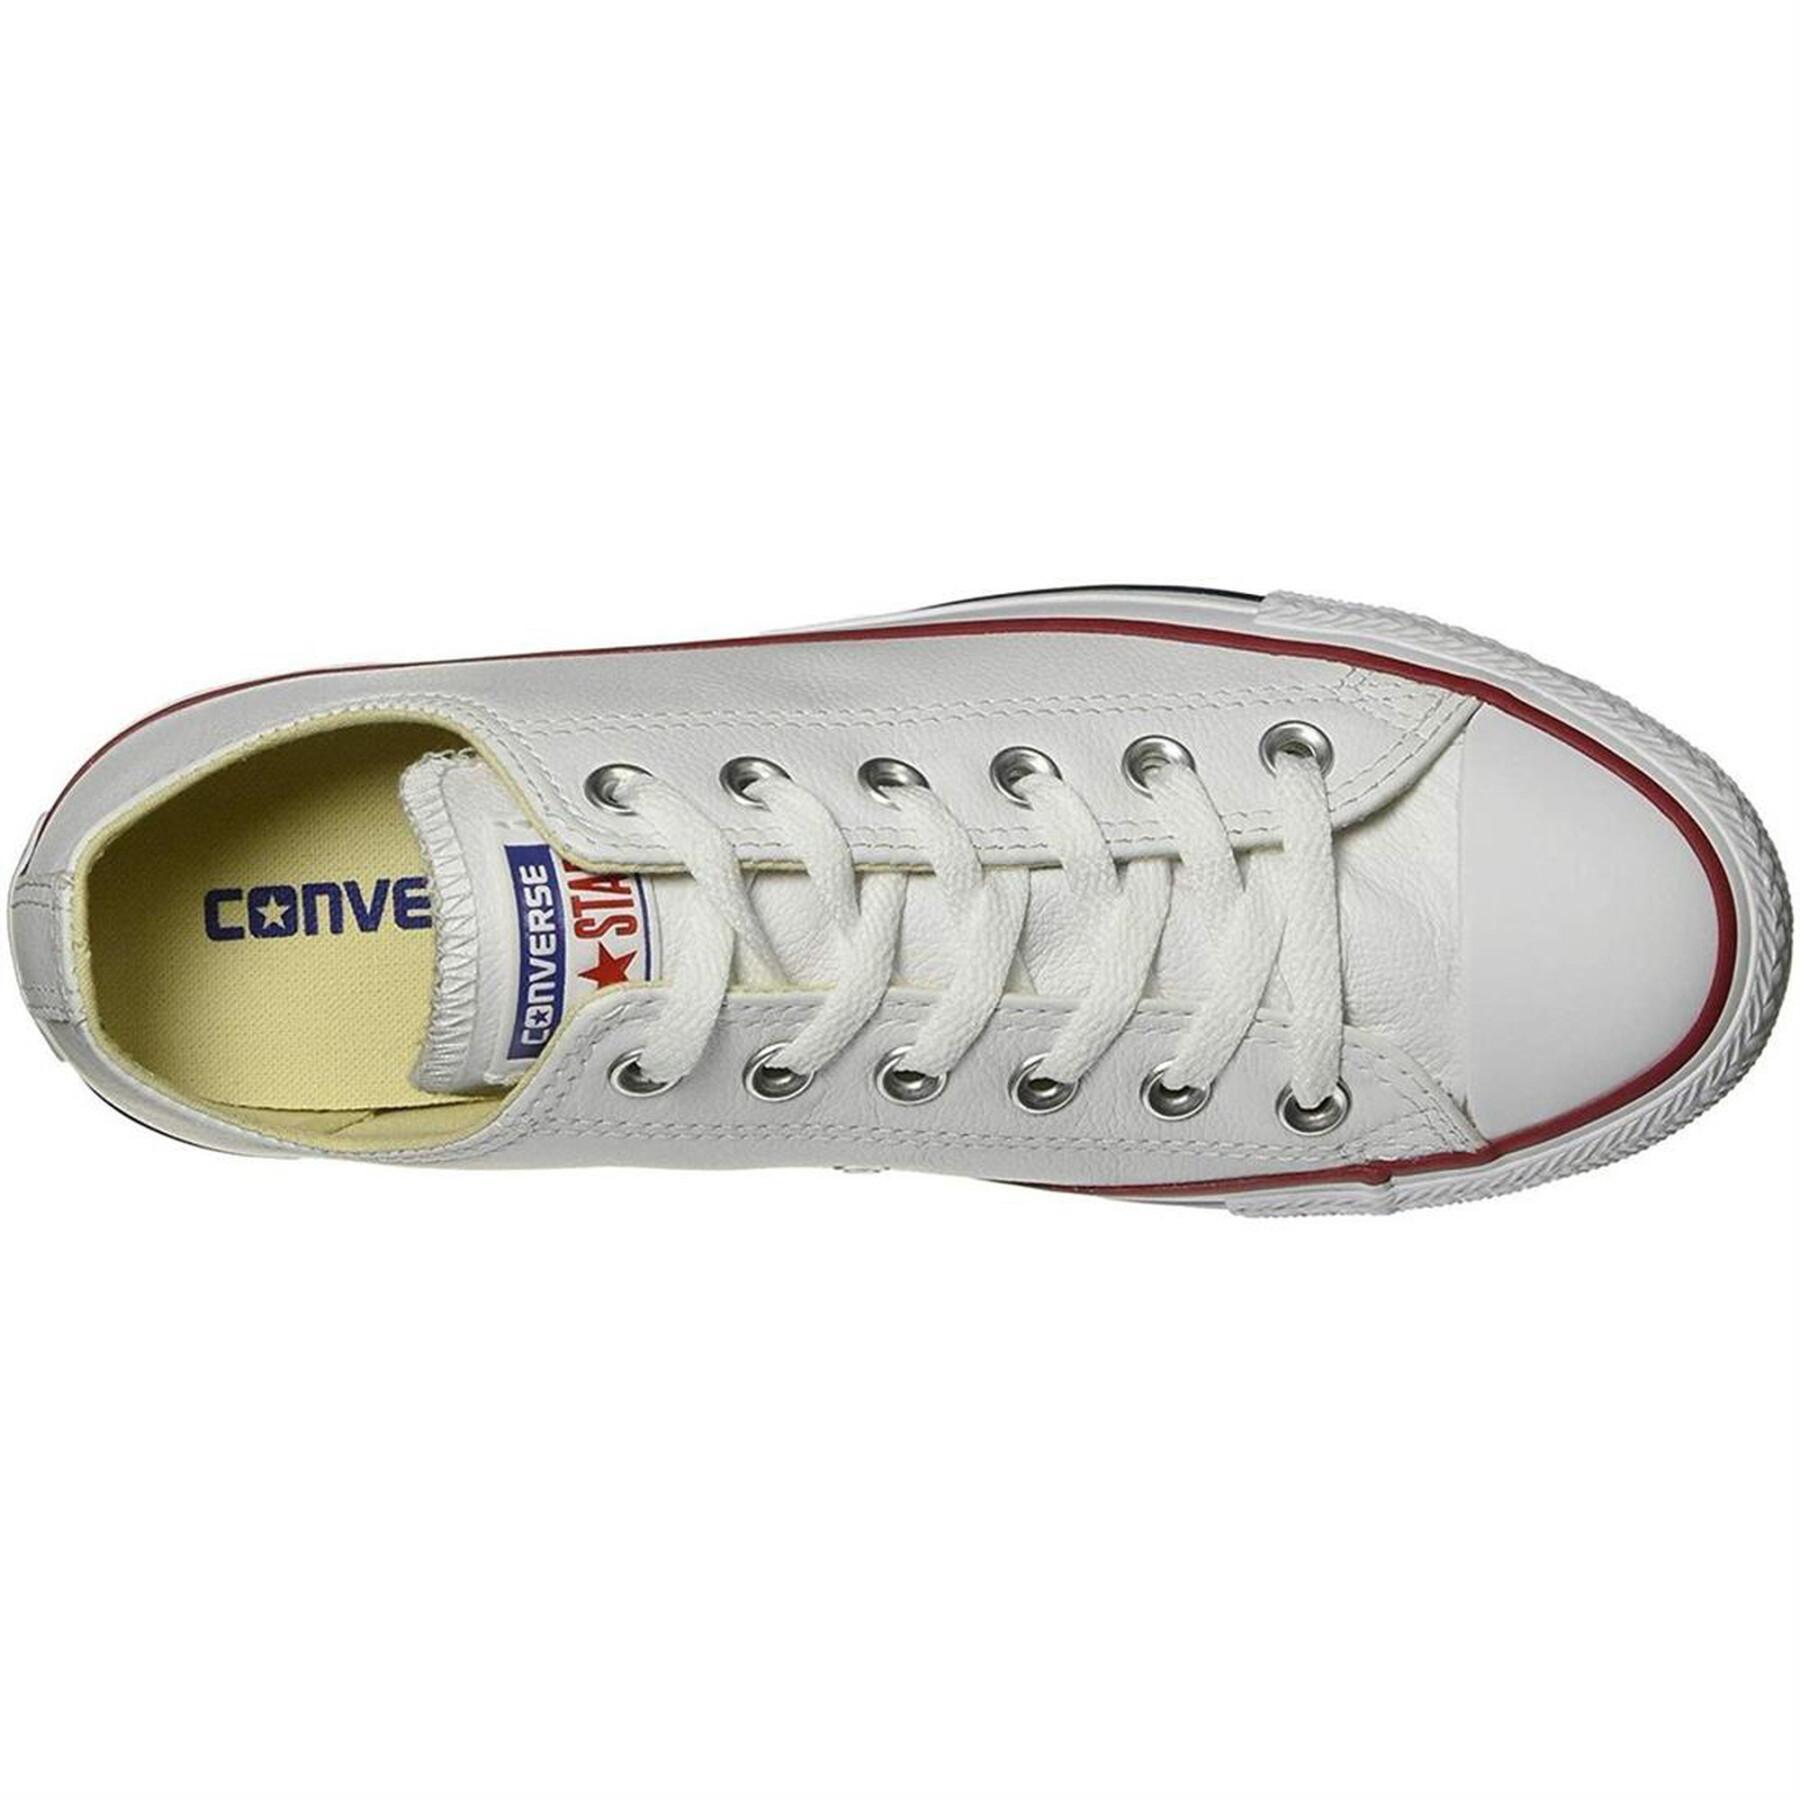 Formadores Converse Chuck Taylor All Star low